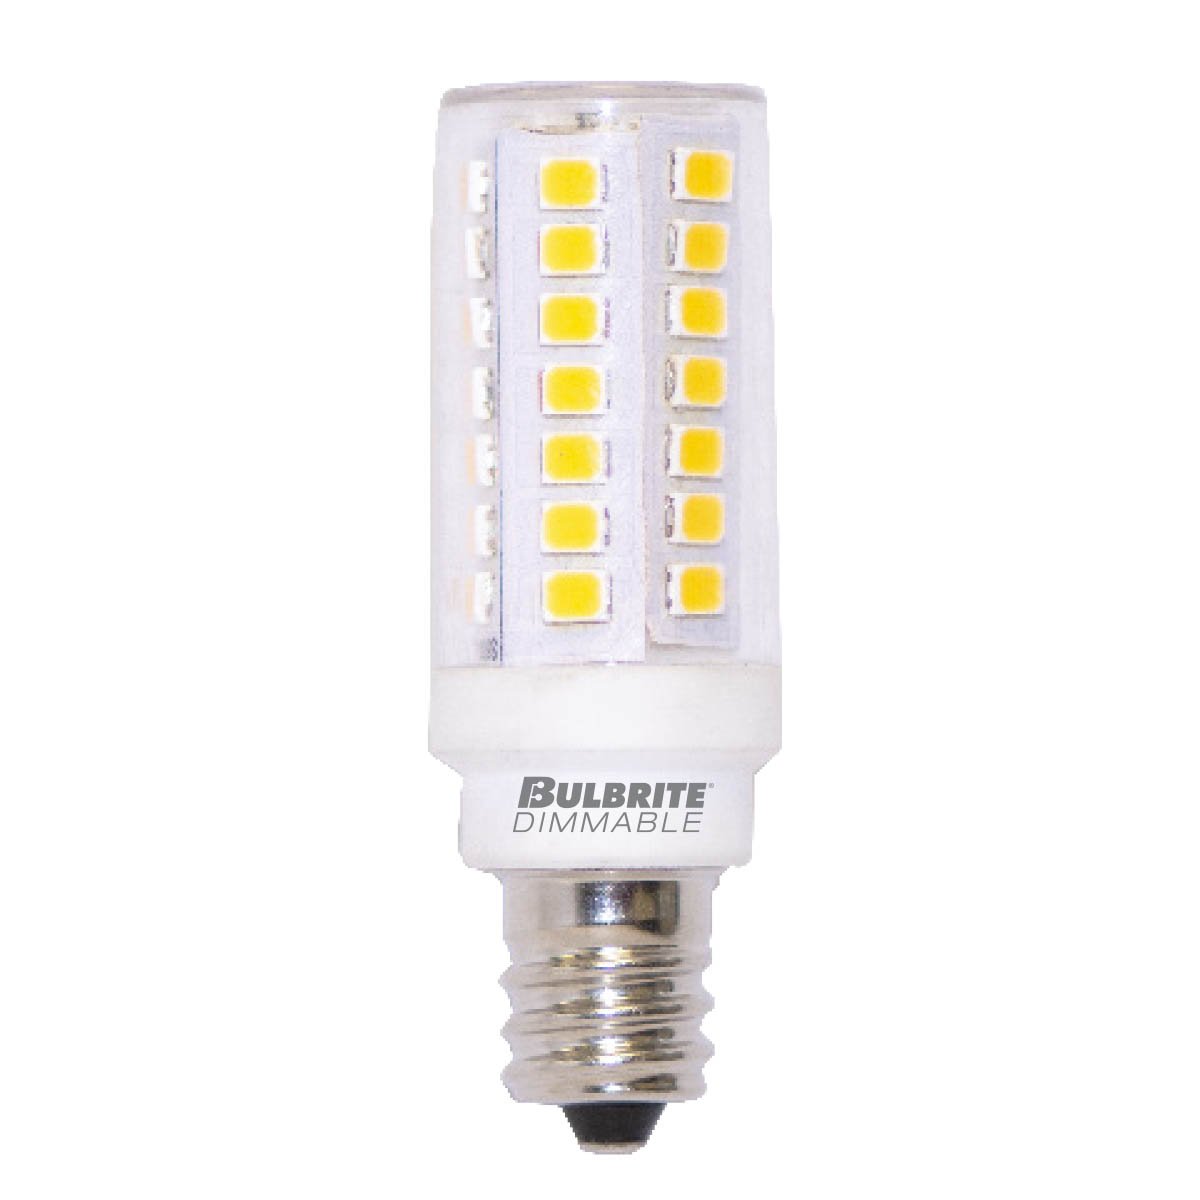 BULBRITE LED T6 CANDELABRA SCREW (E12) 5W DIMMABLE CLEAR 3000K/SOFT WHITE LIGHT 60W INCANDESCENT EQUIVALENT 2PK (770632)